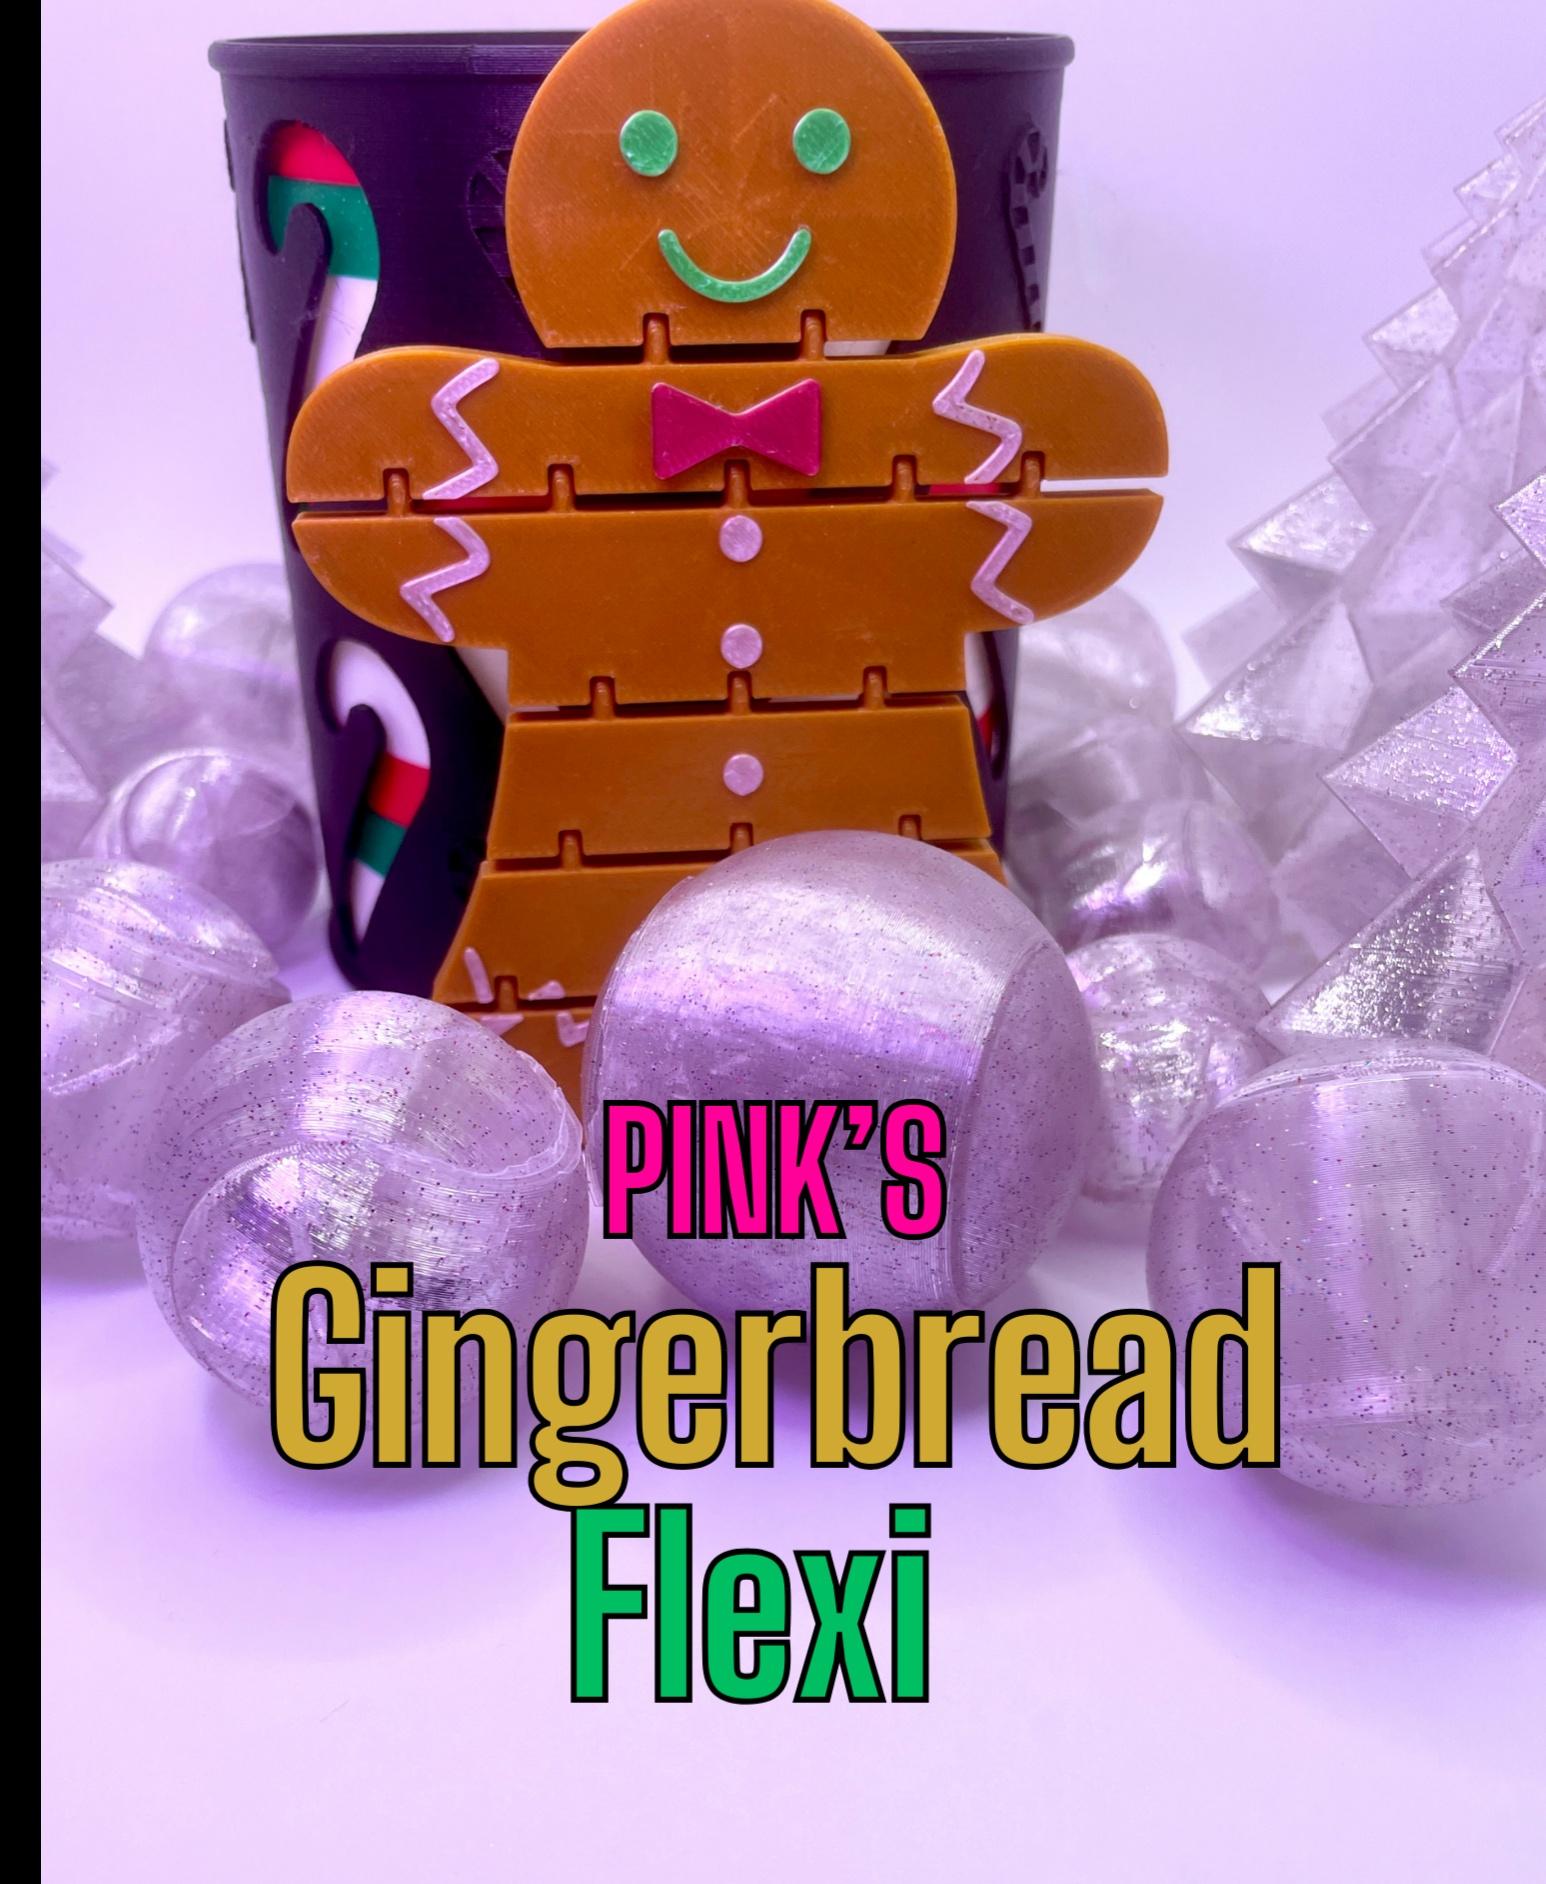 Gingerbread man flexi - He is small and flexi and yummy-looking! - 3d model